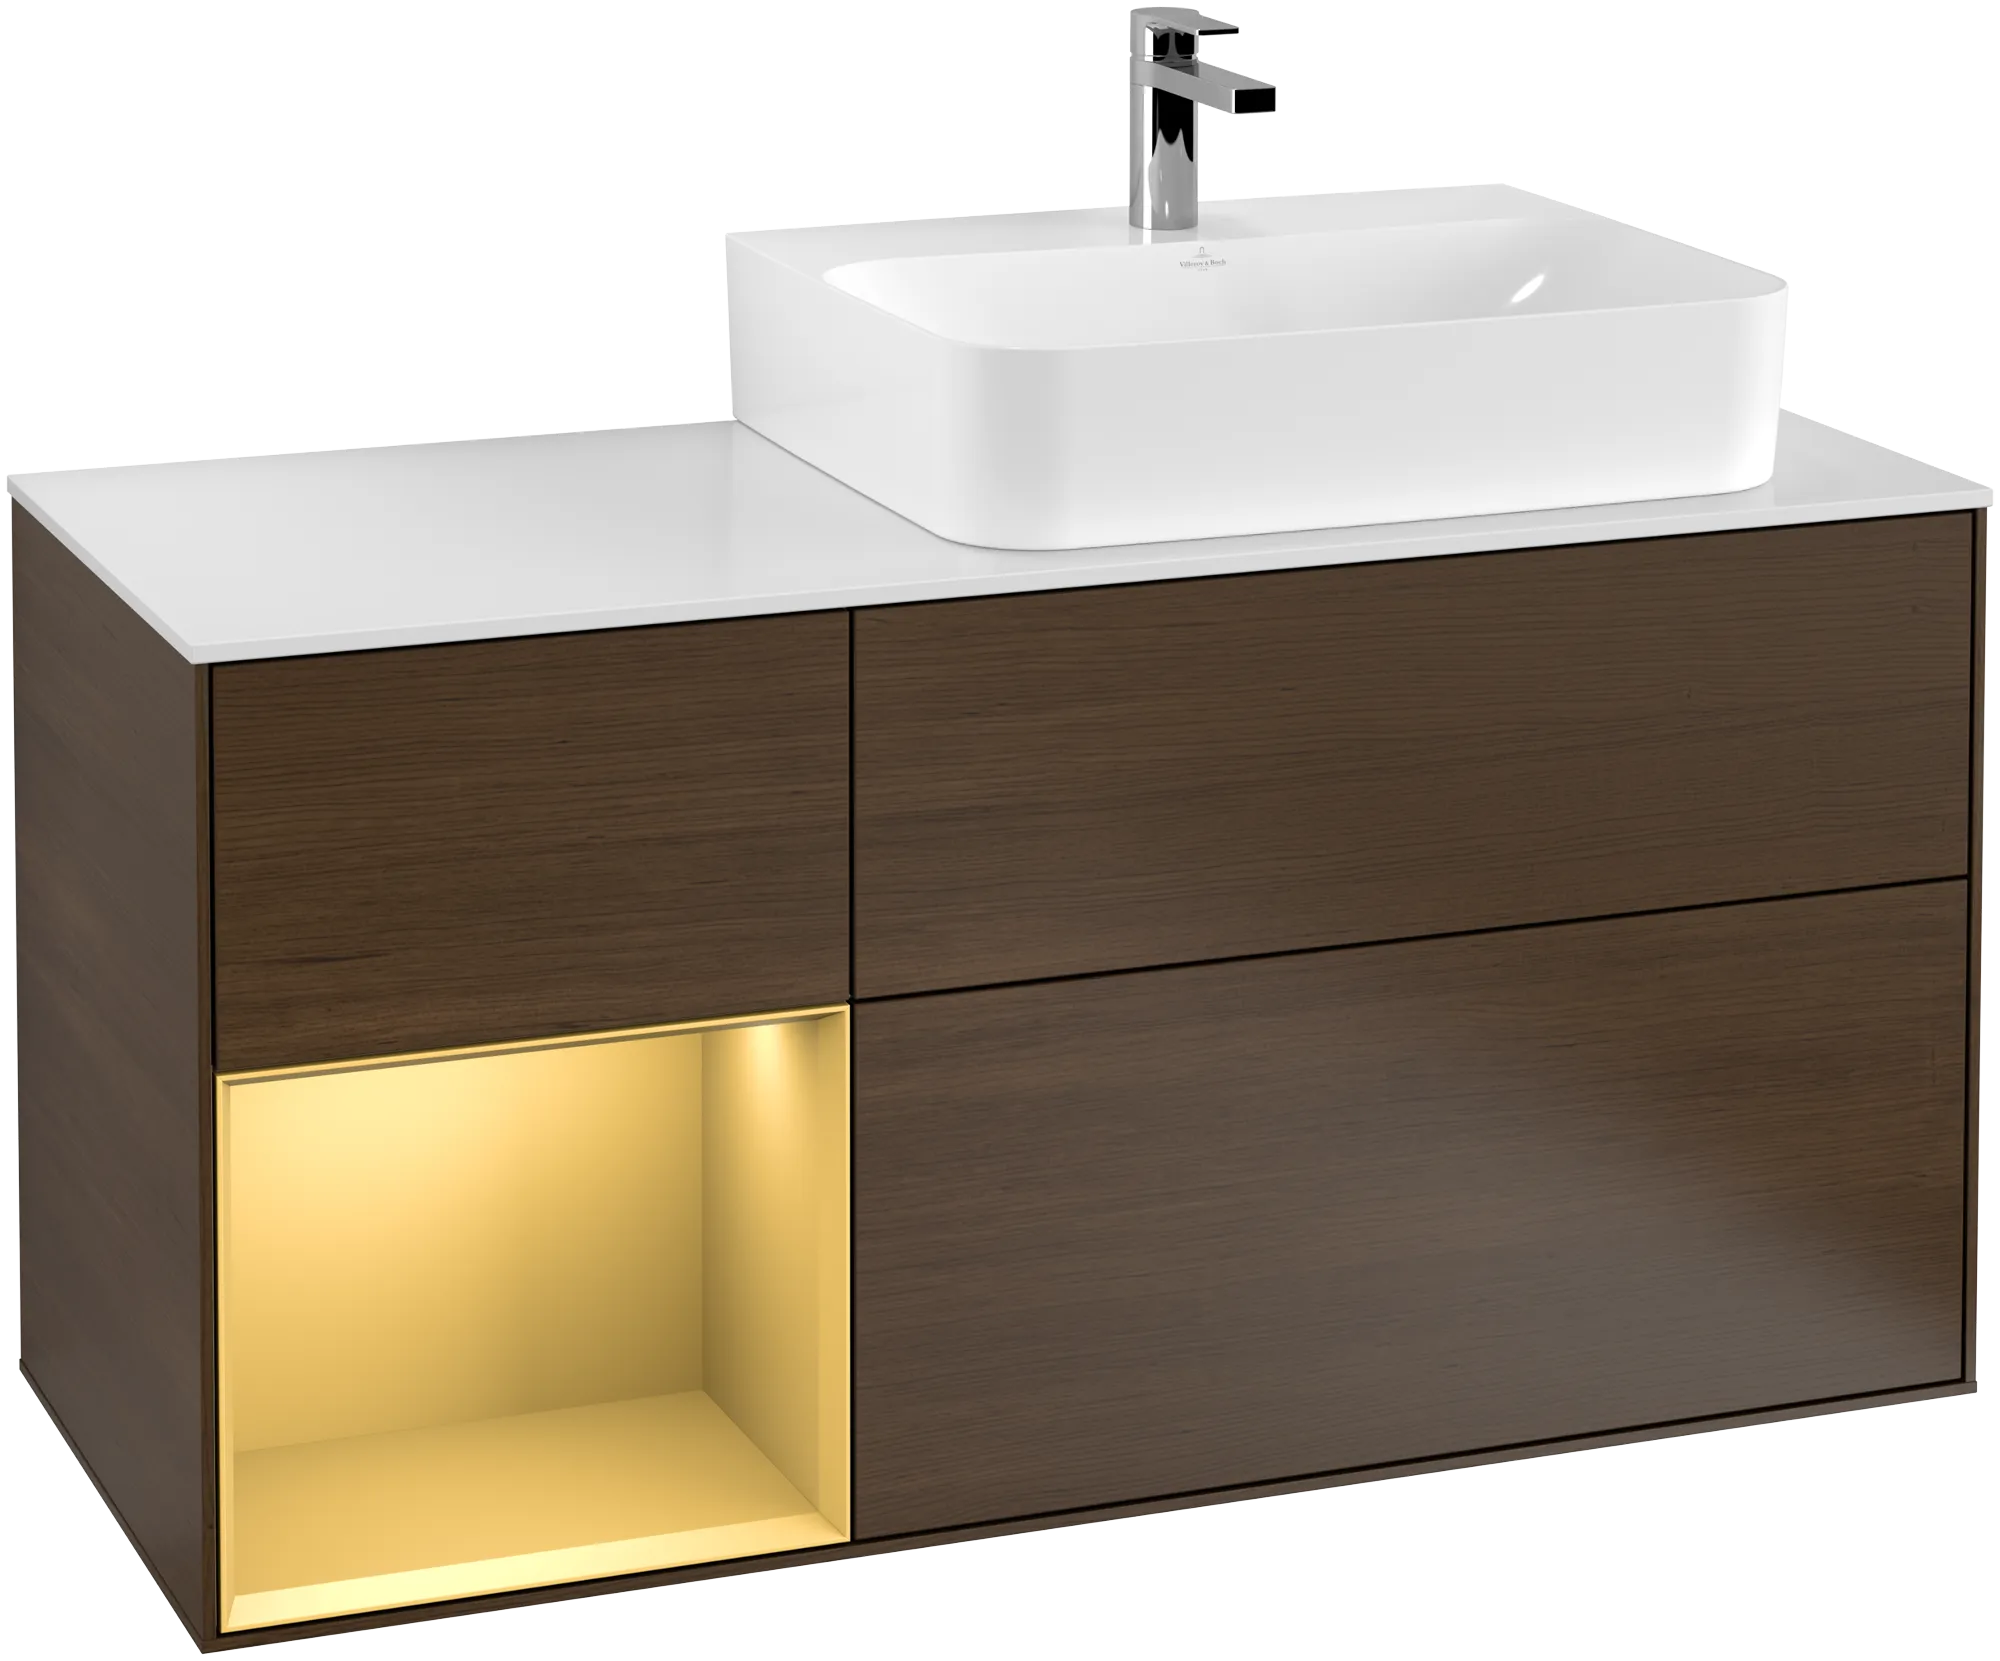 Picture of VILLEROY BOCH Finion Vanity unit, with lighting, 3 pull-out compartments, 1200 x 603 x 501 mm, Walnut Veneer / Gold Matt Lacquer / Glass White Matt #G141HFGN